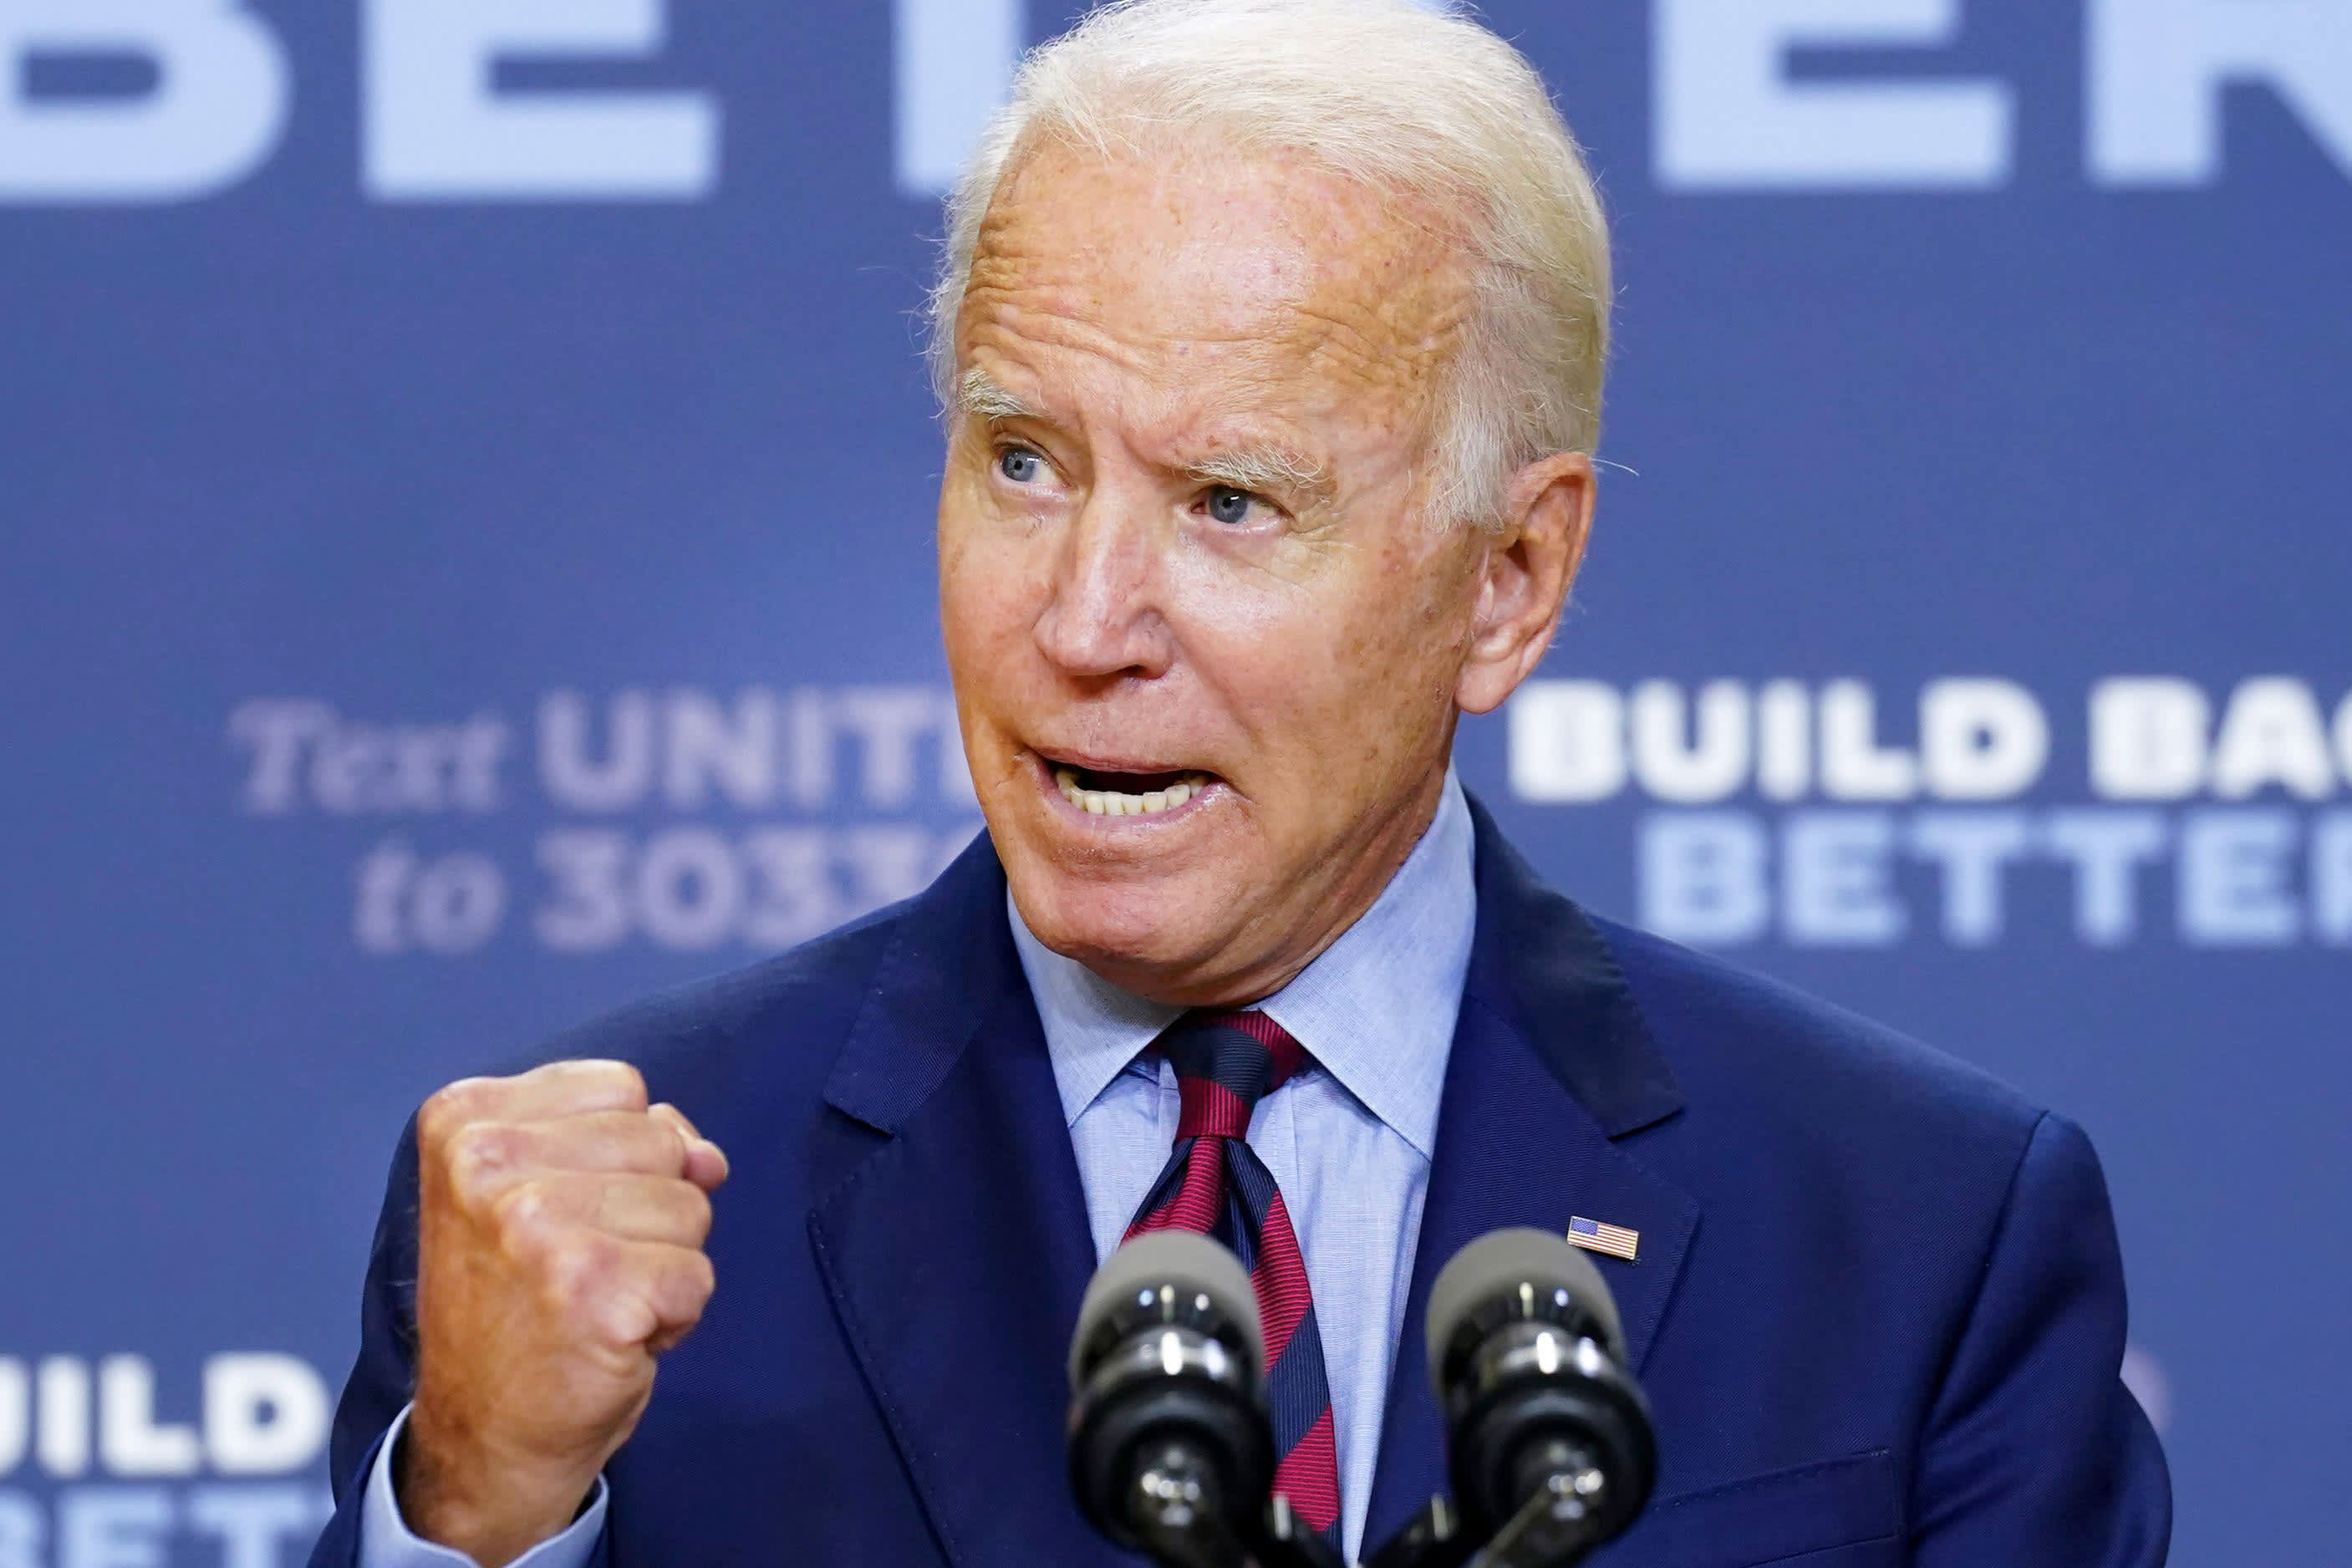 Biden to mark Labor Day with union event as U.S. campaign enters homestretch thumbnail